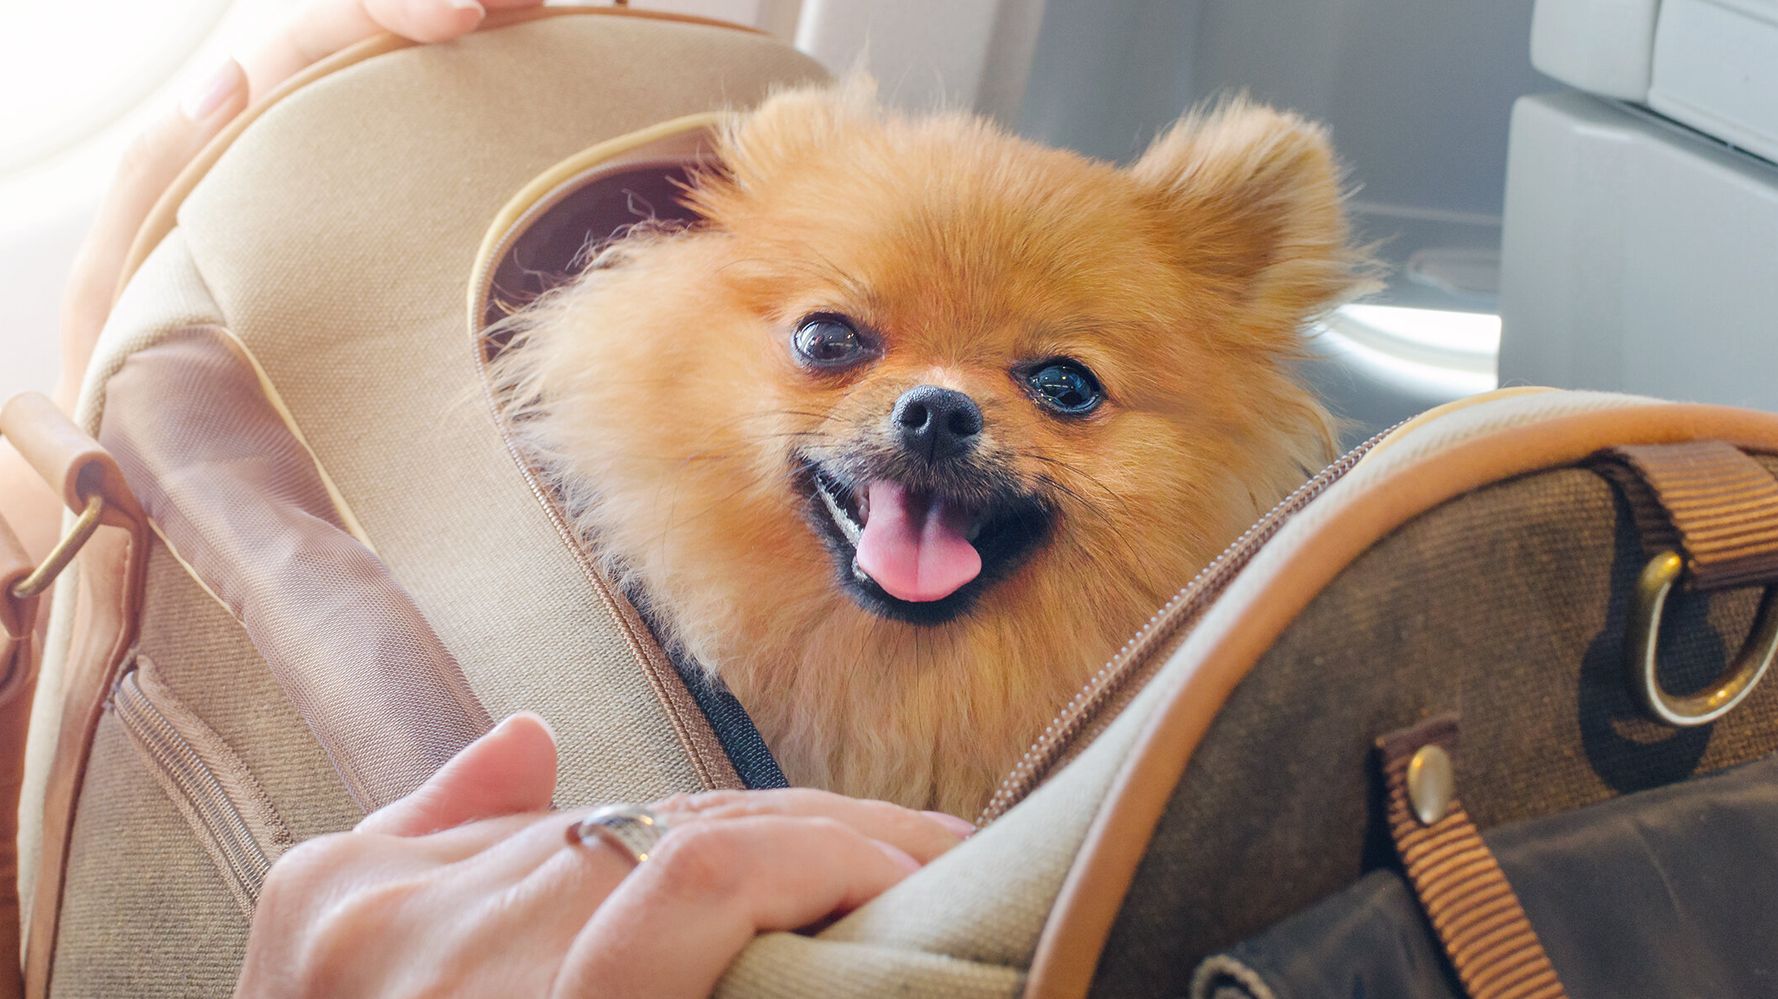 Airlines No Longer Have To Treat Emotional Support Animals As Service Animals